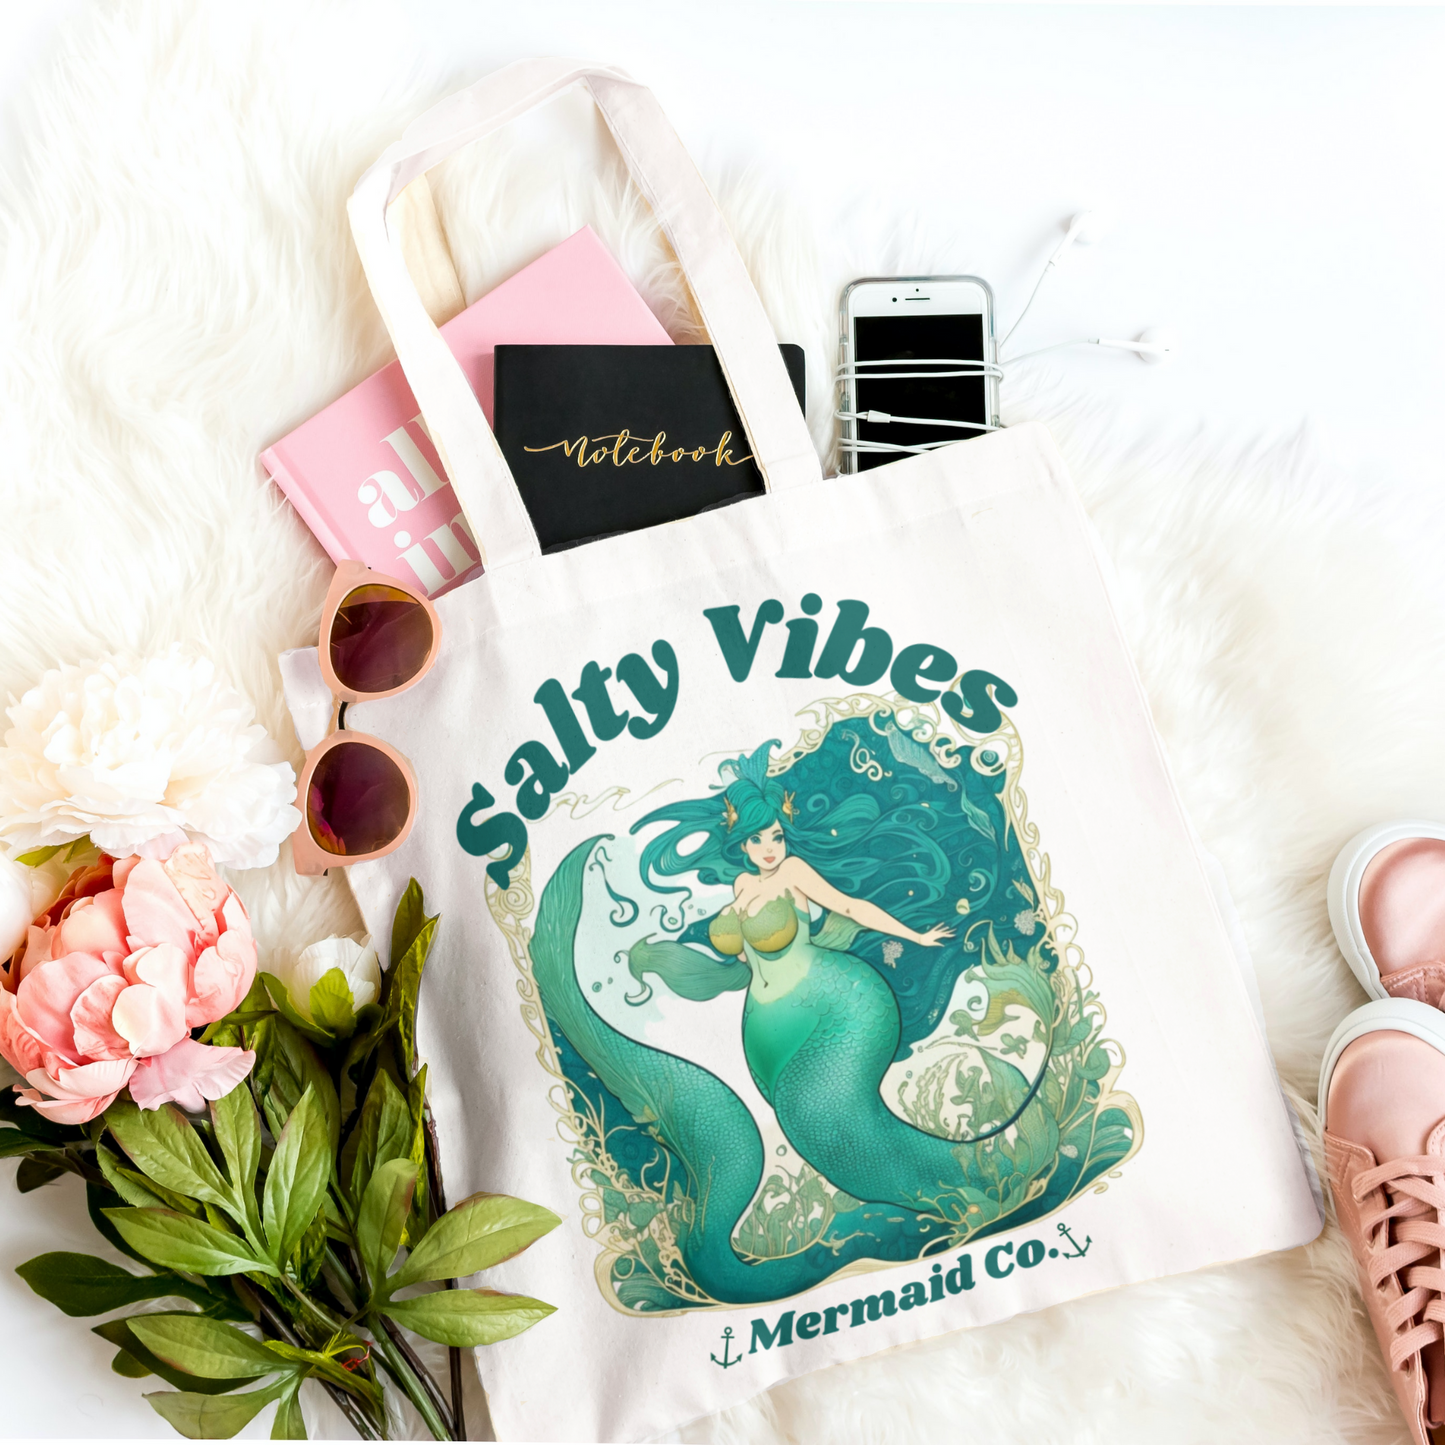 Mermaid Tote Bag Gift, Set of 3 Reusable Cotton Book Bag Beach Tote Purse, Stay Salty Vibes Mermaidcore Staycation Party Favor Swag Bags